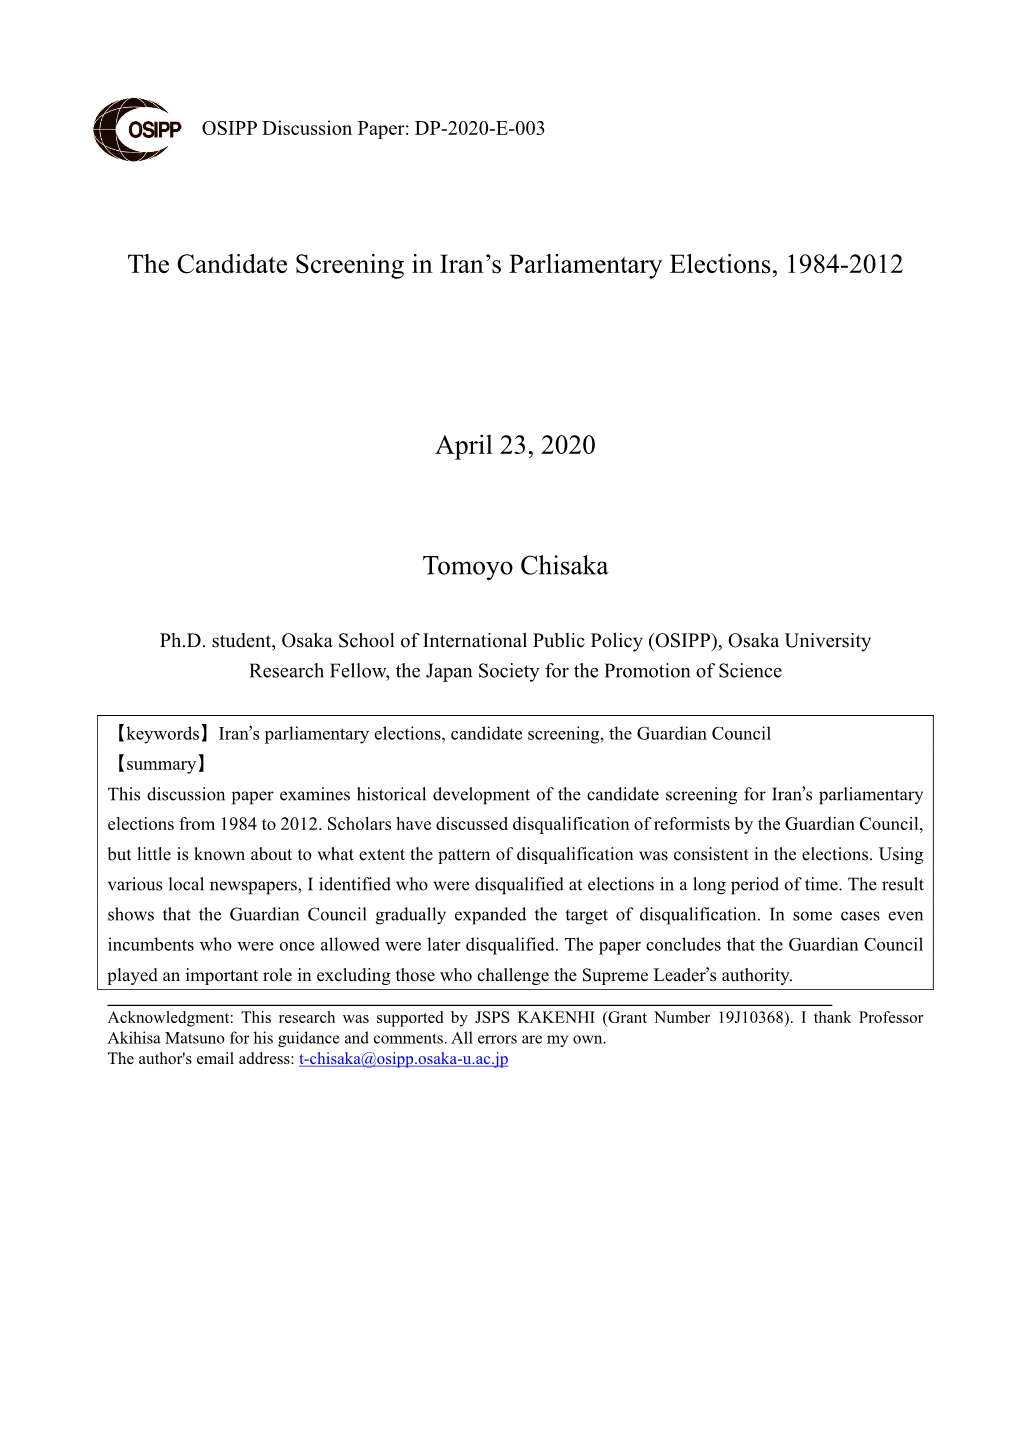 The Candidate Screening in Iran's Parliamentary Elections, 1984-2012